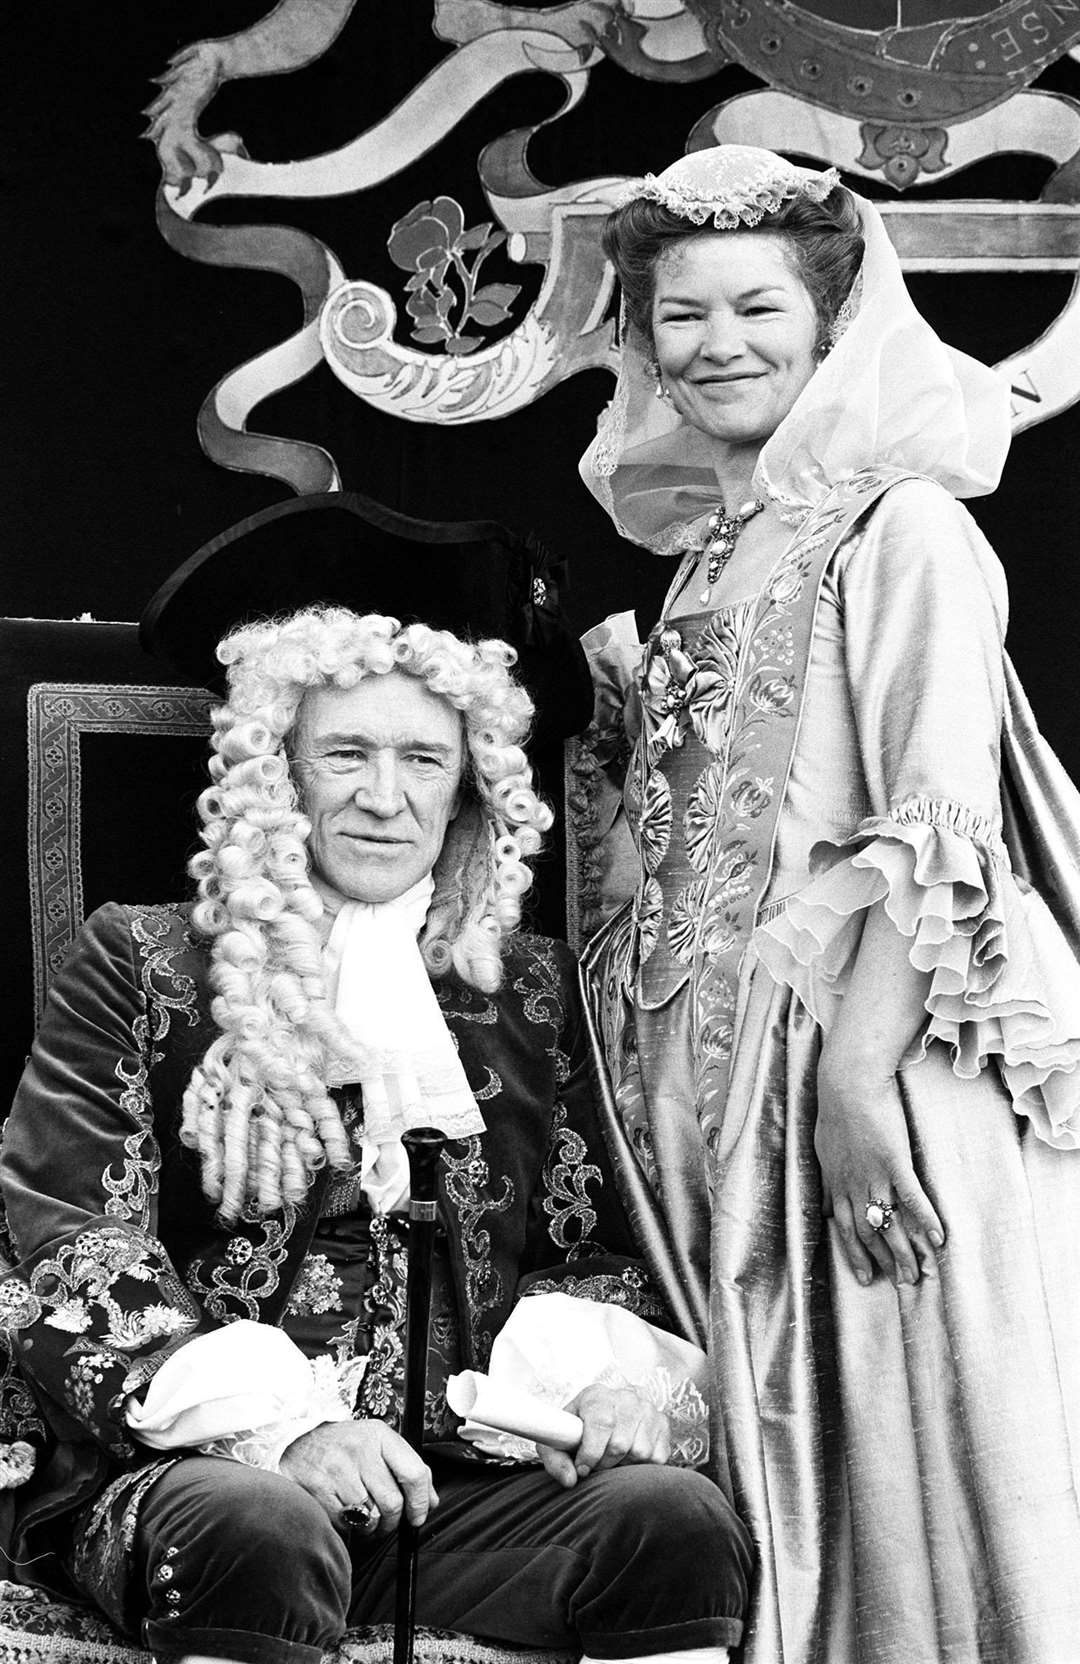 Richard Harris, 58, as King George II with Glenda Jackson, 52, as Queen Caroline during filming at Bath, Avon, for film King Of The Wind (Barry Batchelor/PA)